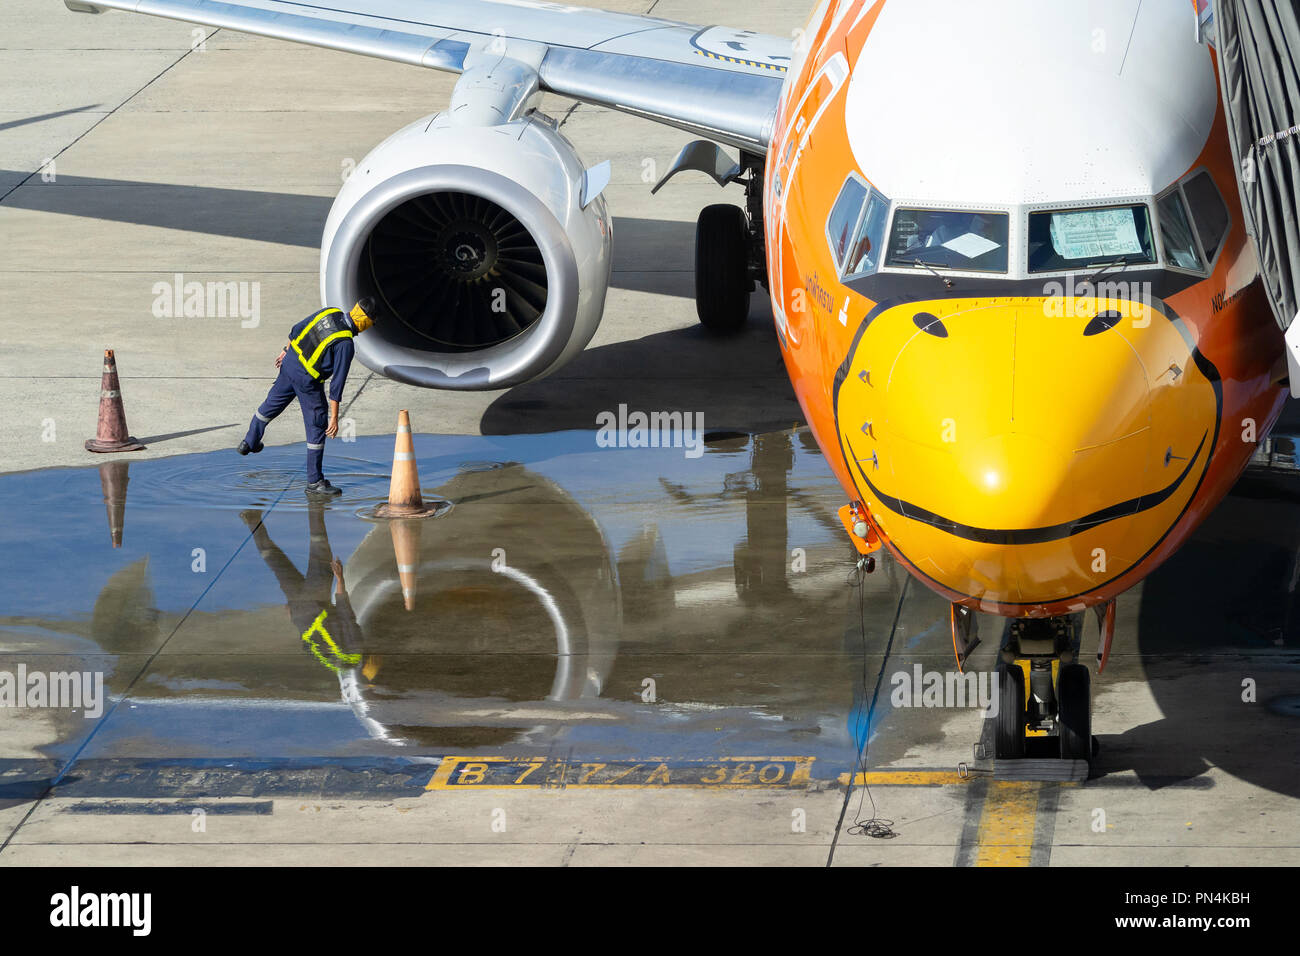 Bangkok, Thailand - September 19, 2018 : member ground crew worker checking aircraft turbine engine, air intake and fan blades of  Nok Air airplane be Stock Photo